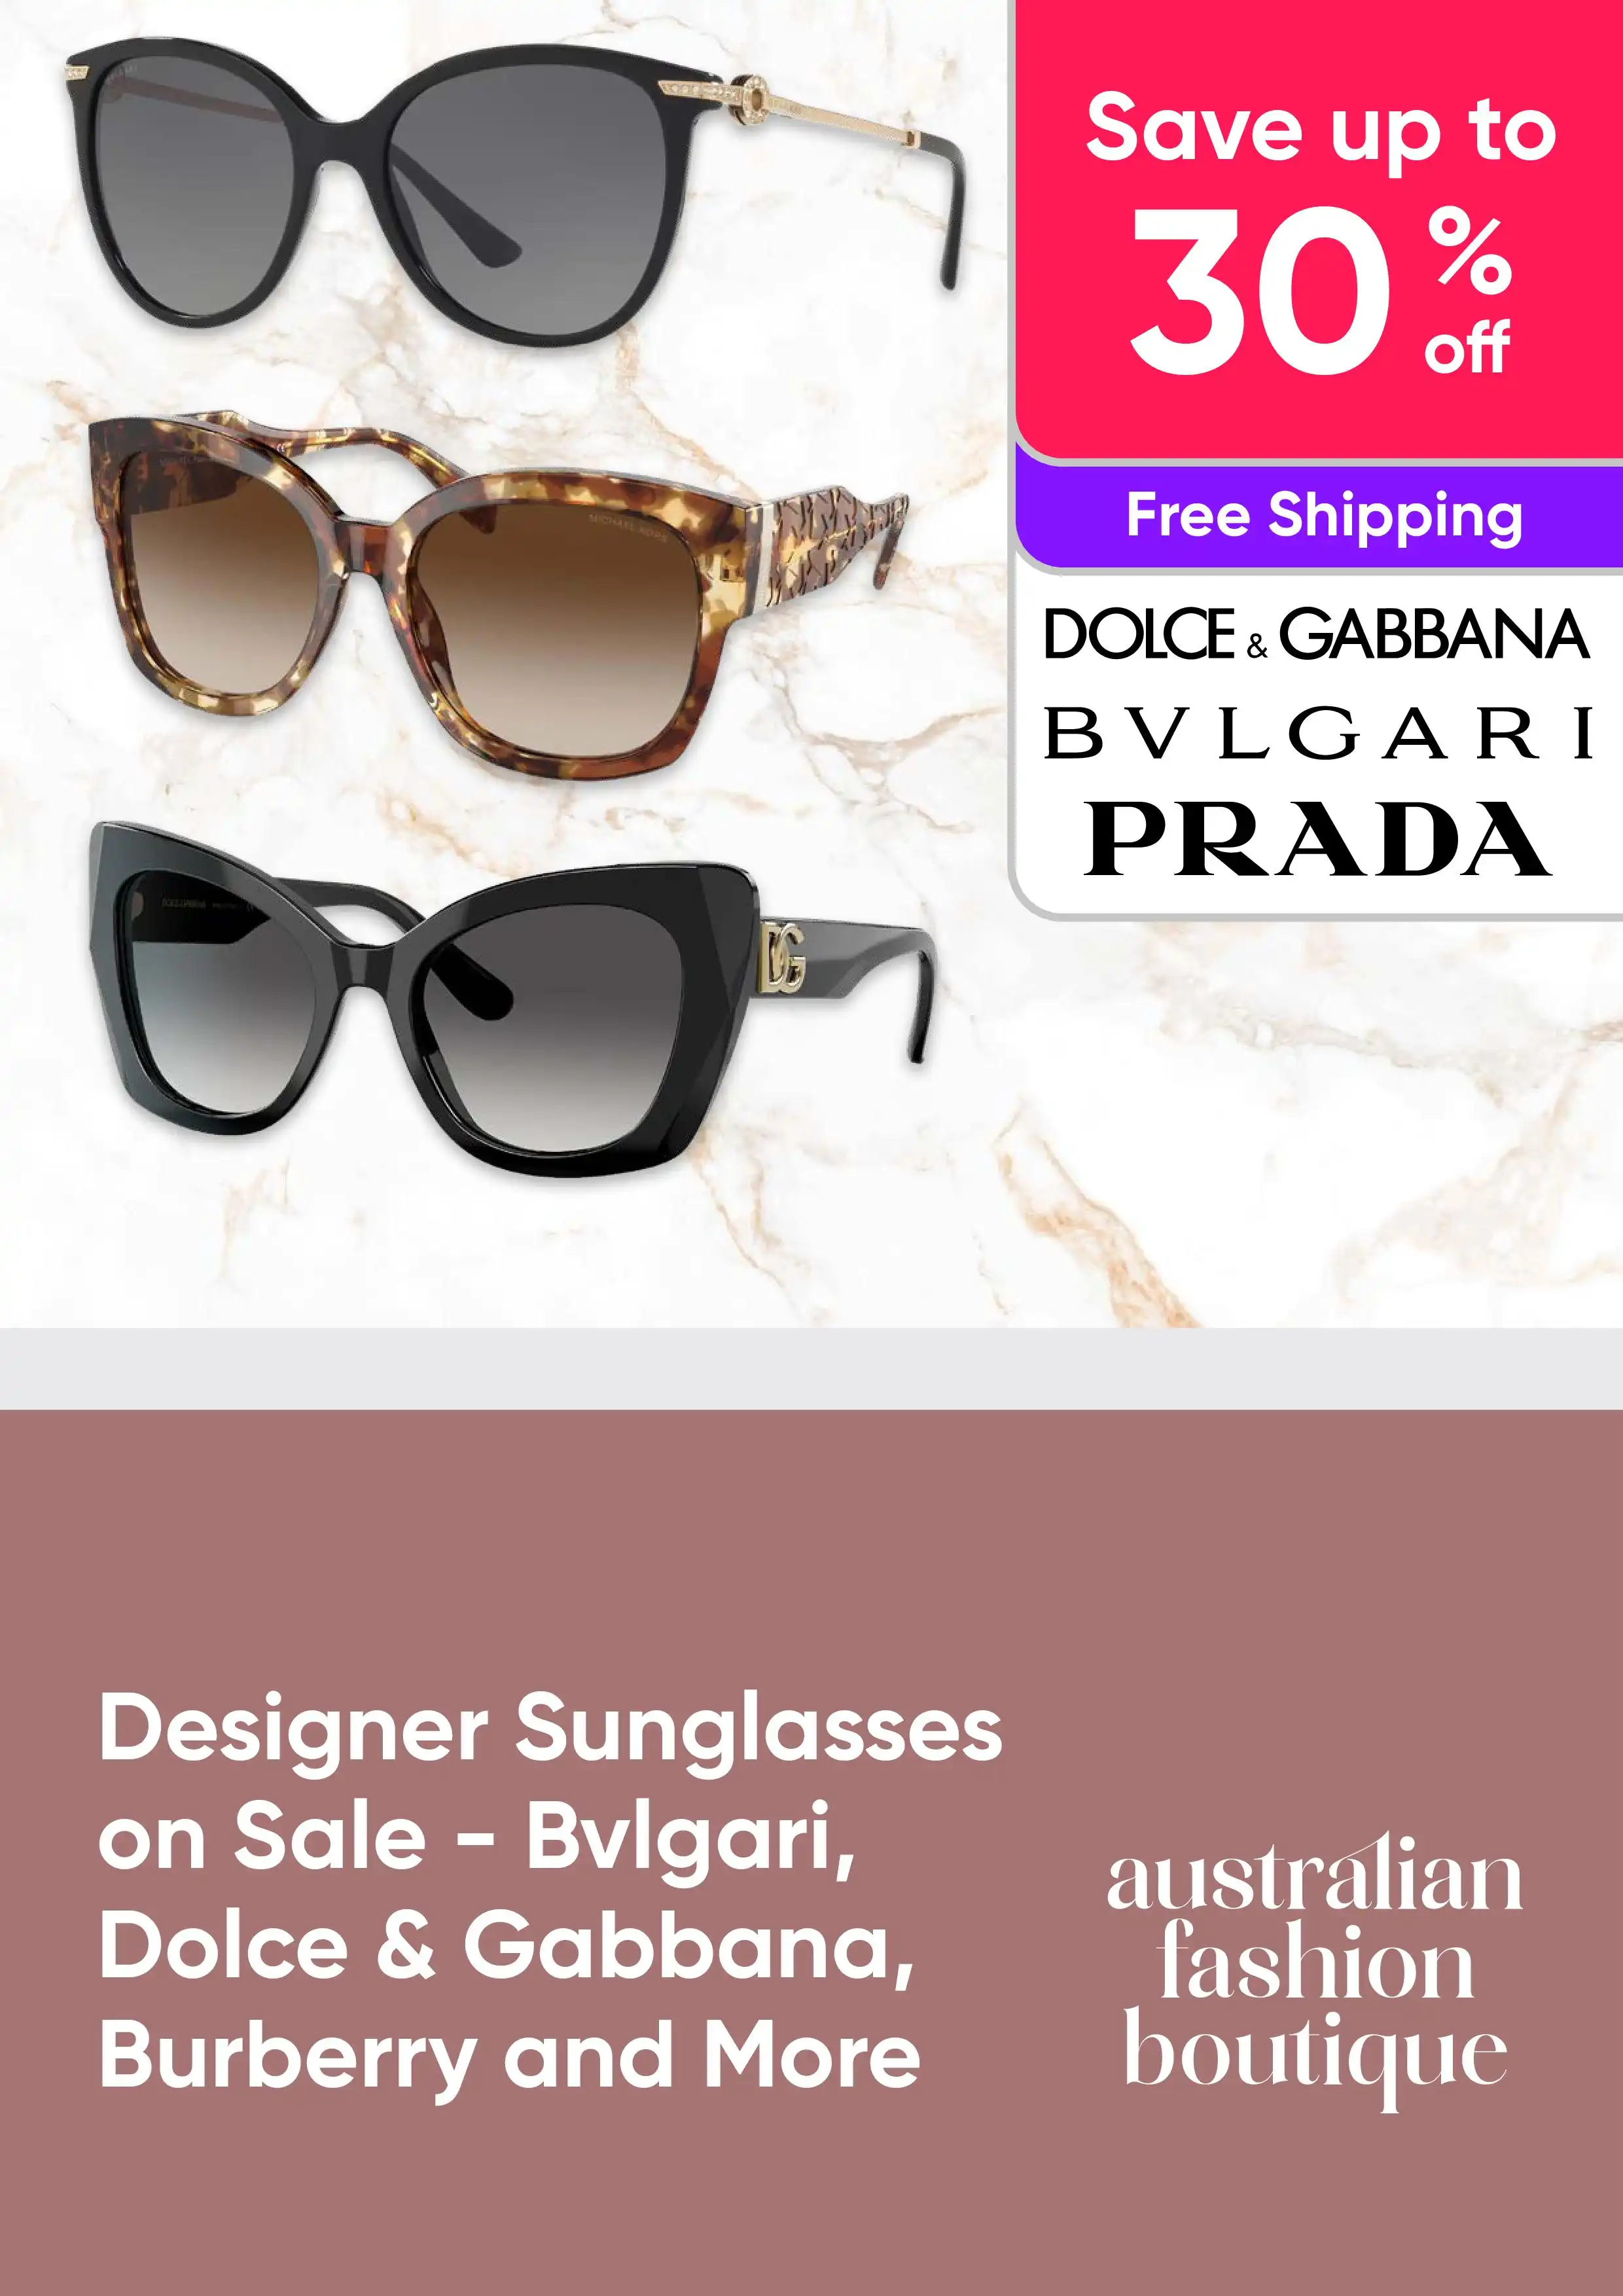 Designer Sunglasses on Sale - Save Up To 30% Off Bvlgari, Dolce & Gabbana, Burberry and More